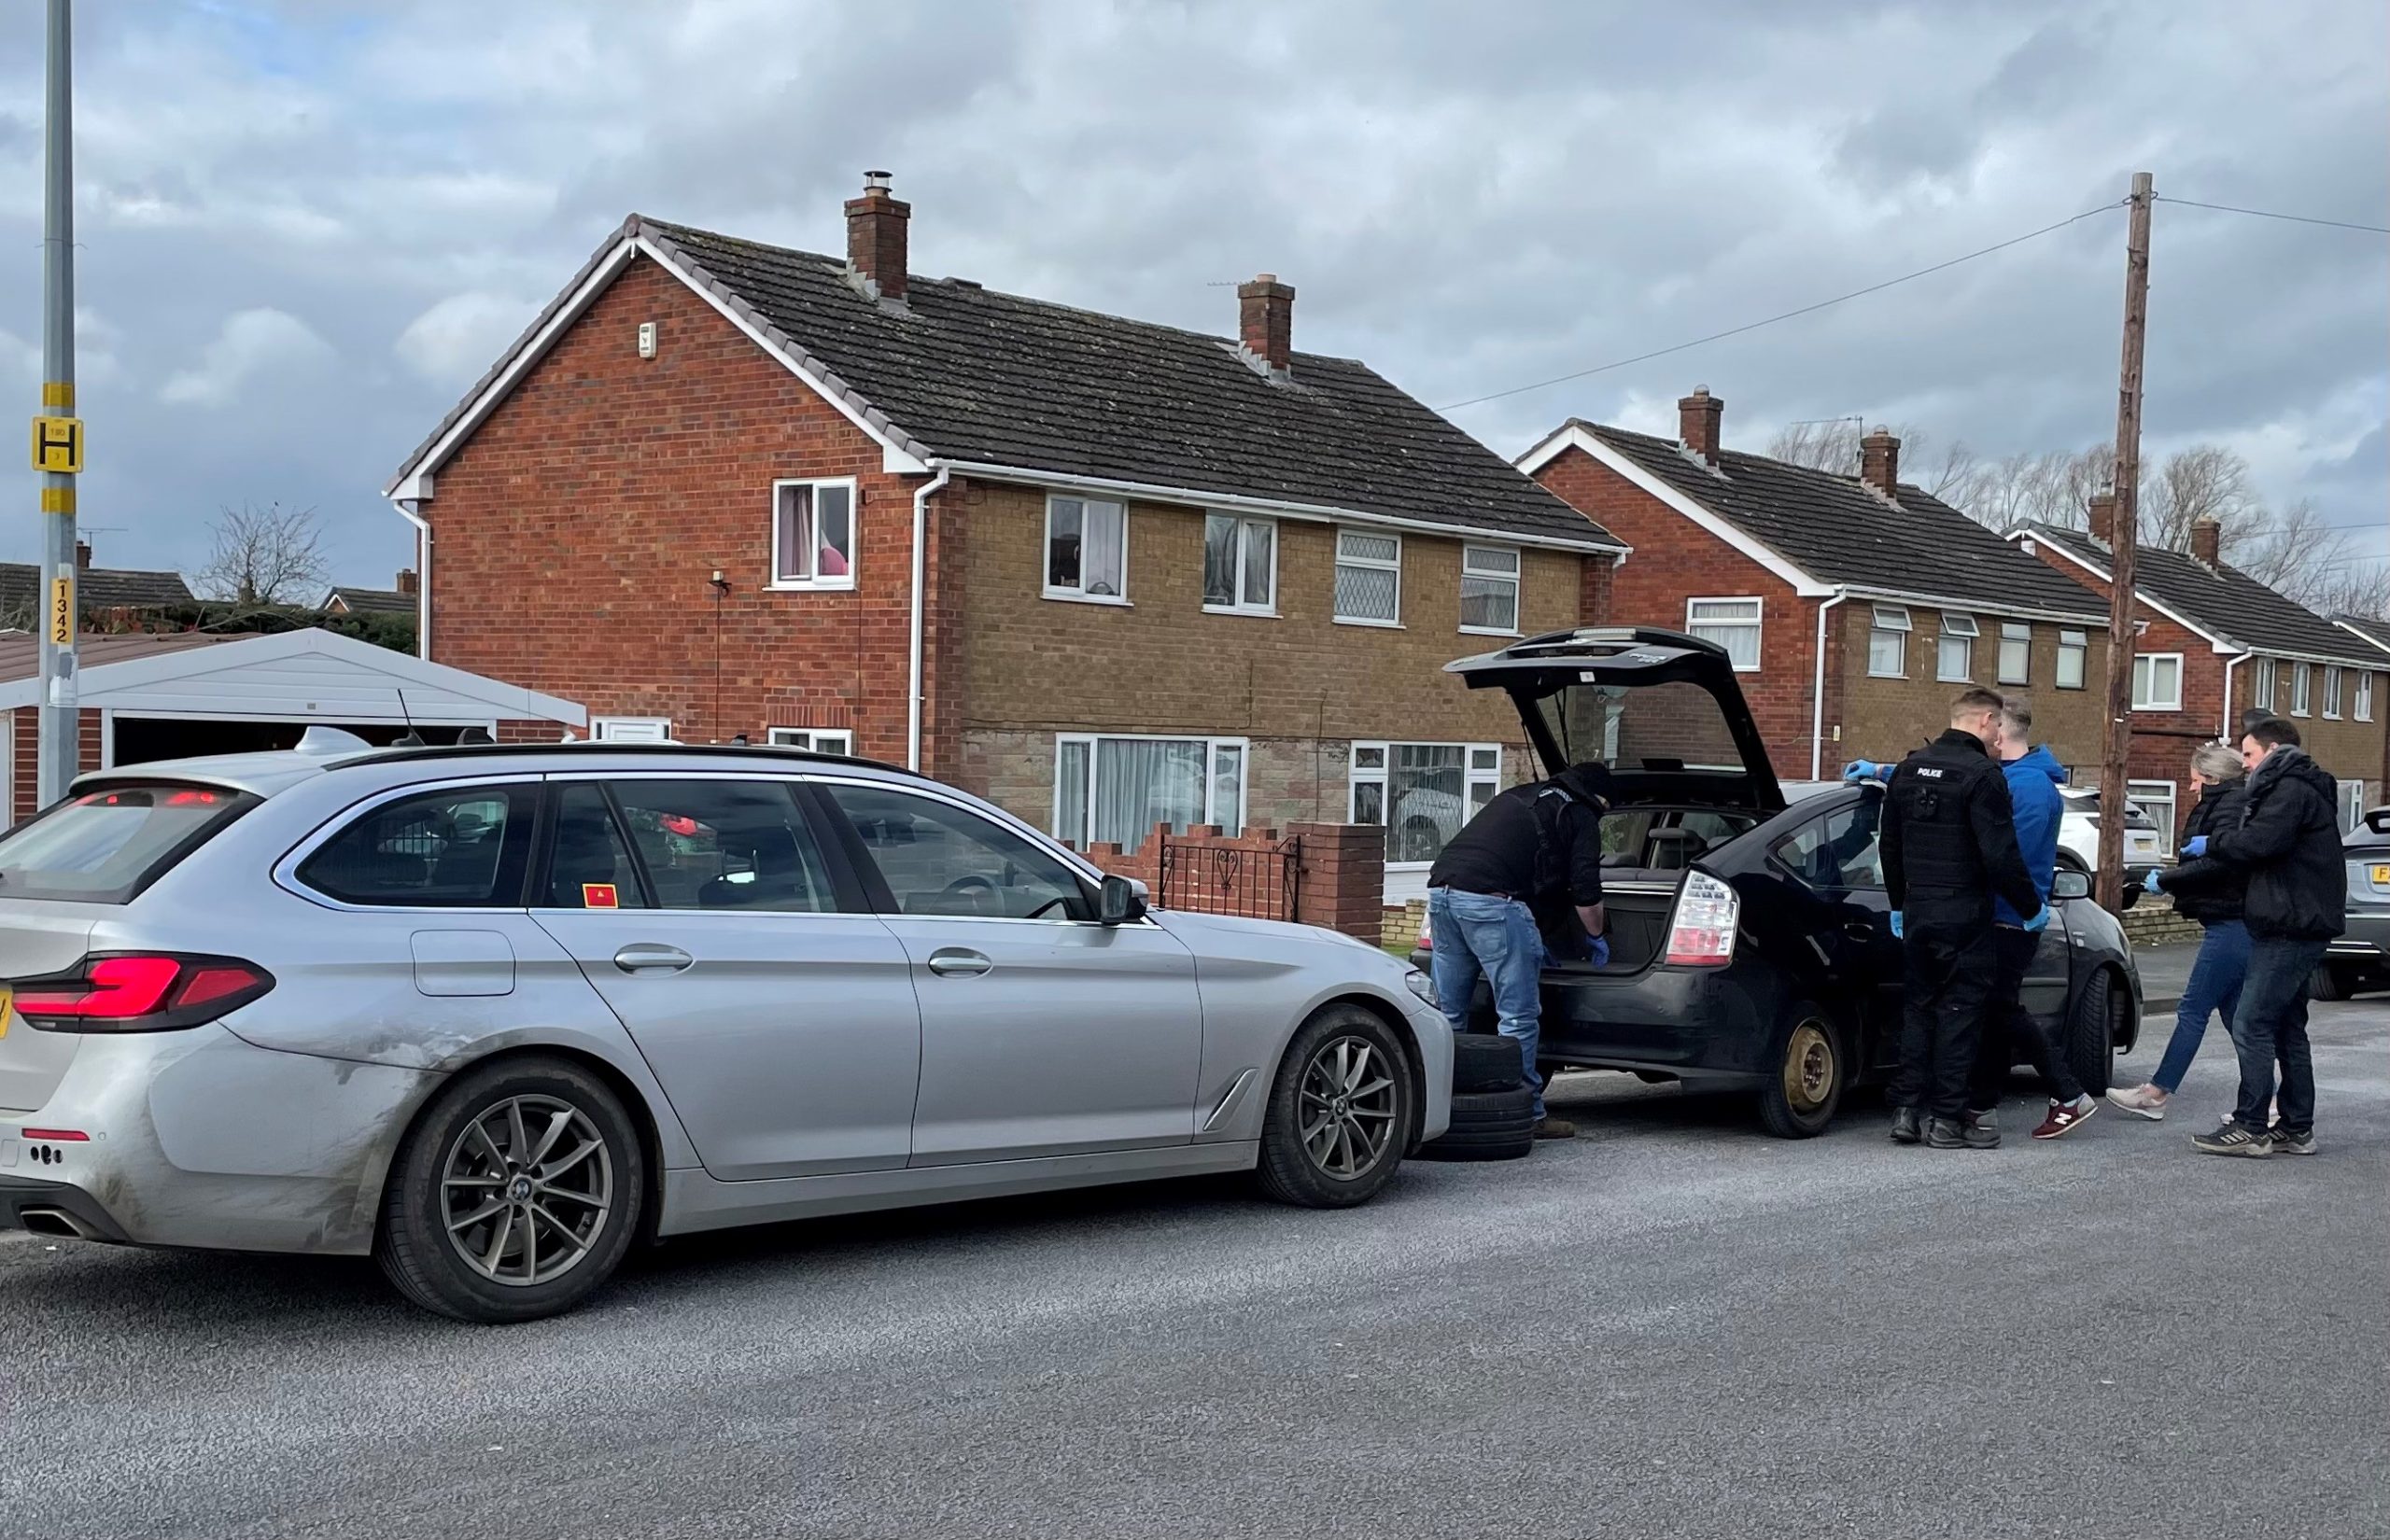 NEWS | 50 people arrested as West Mercia Police target county lines drug dealing in Herefordshire and the surrounding area